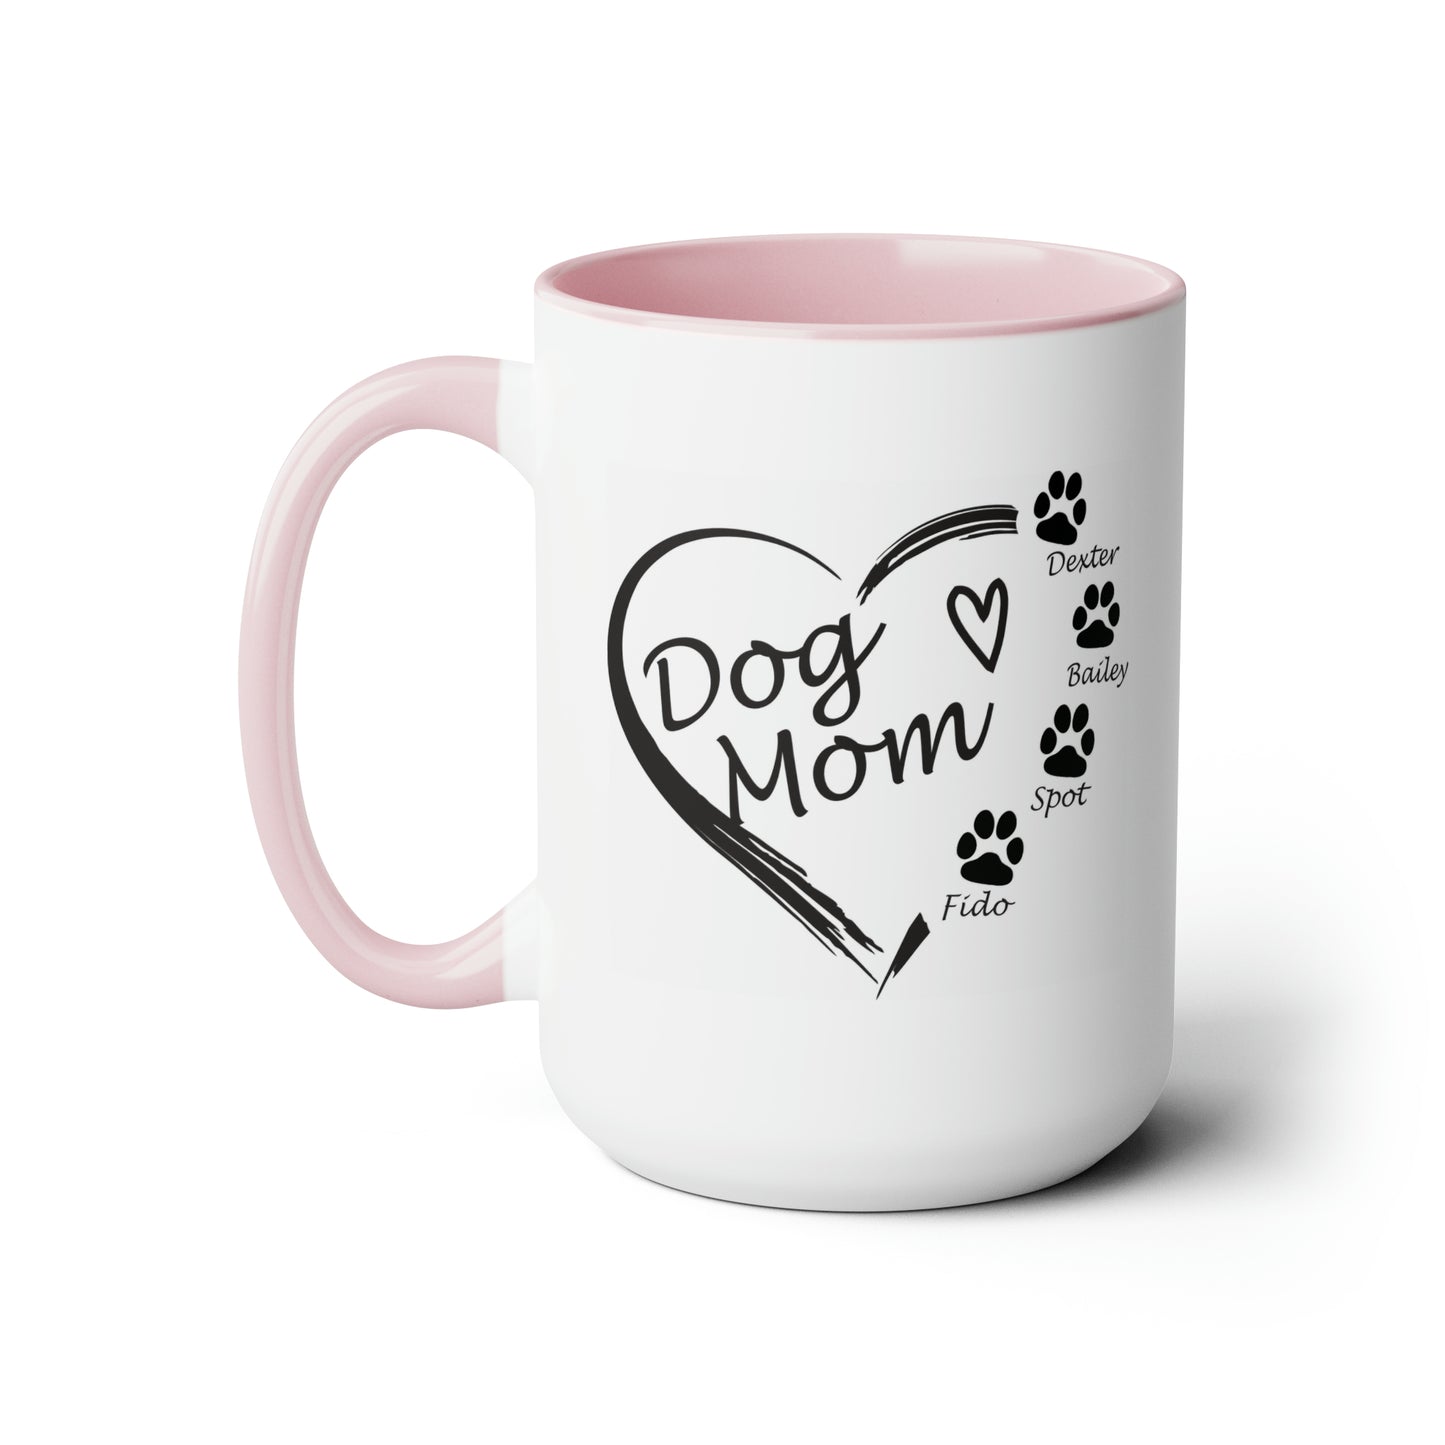 Dog Mom Personalized Coffee Mugs with image on both sides